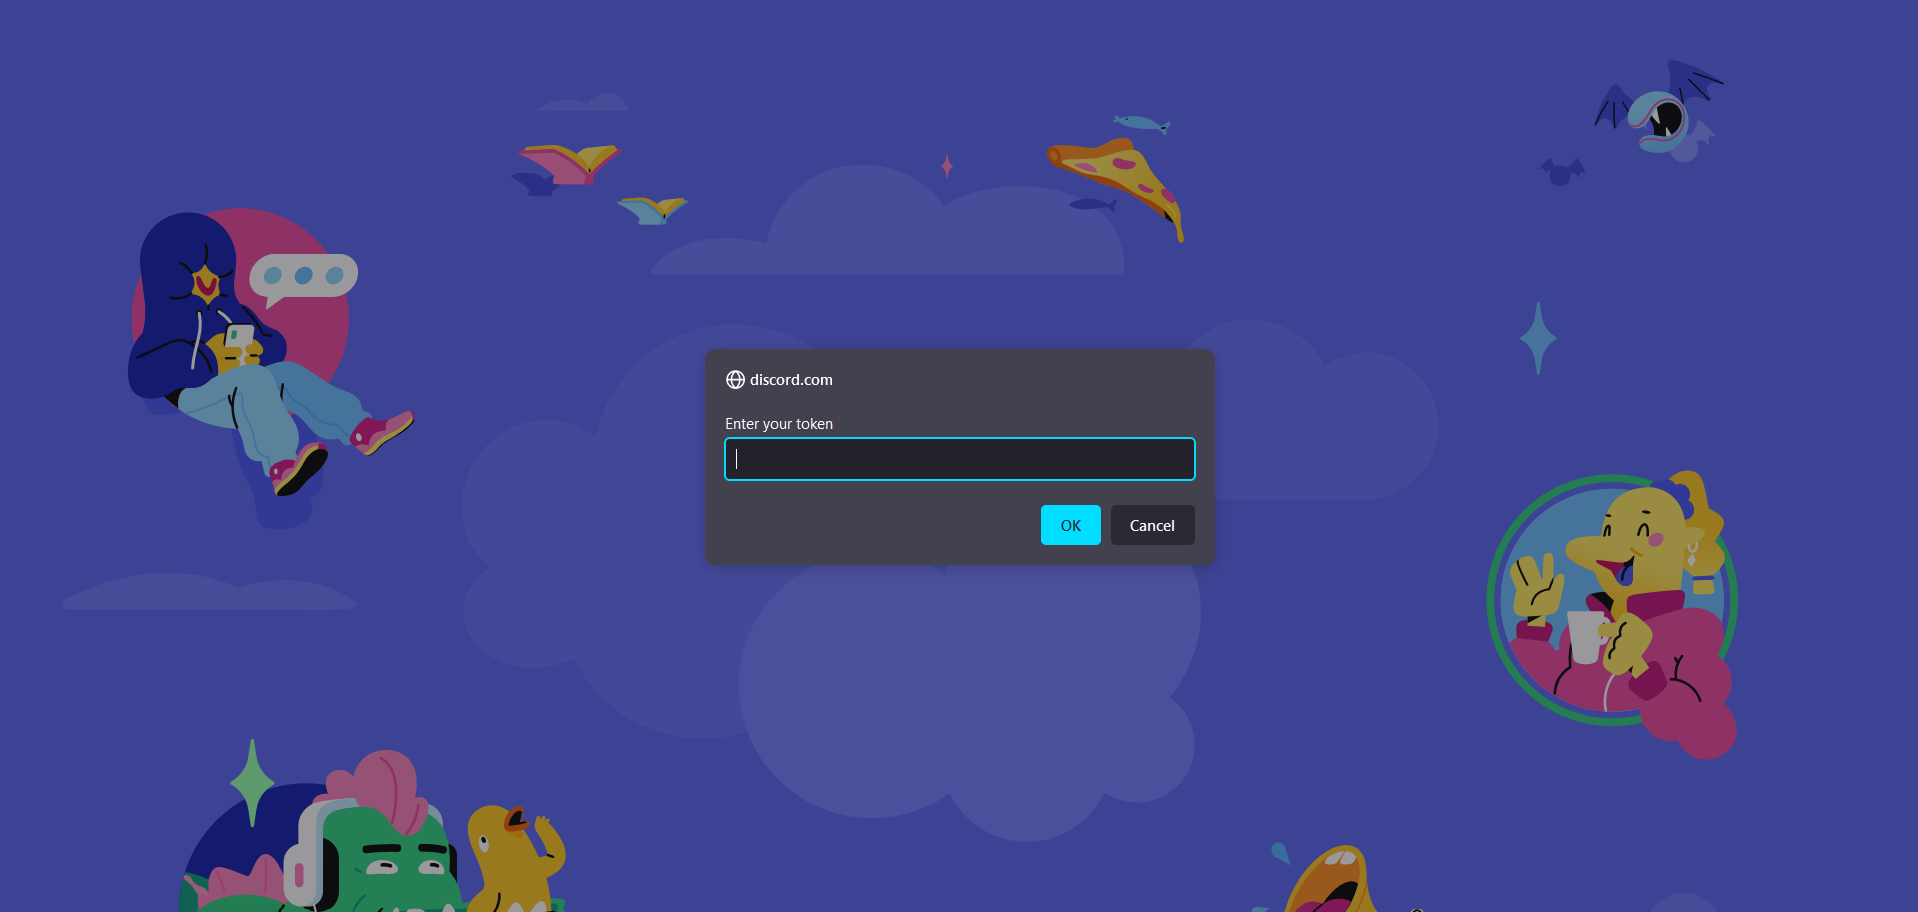 How To Login To Discord Using Token [Without Email or Password]